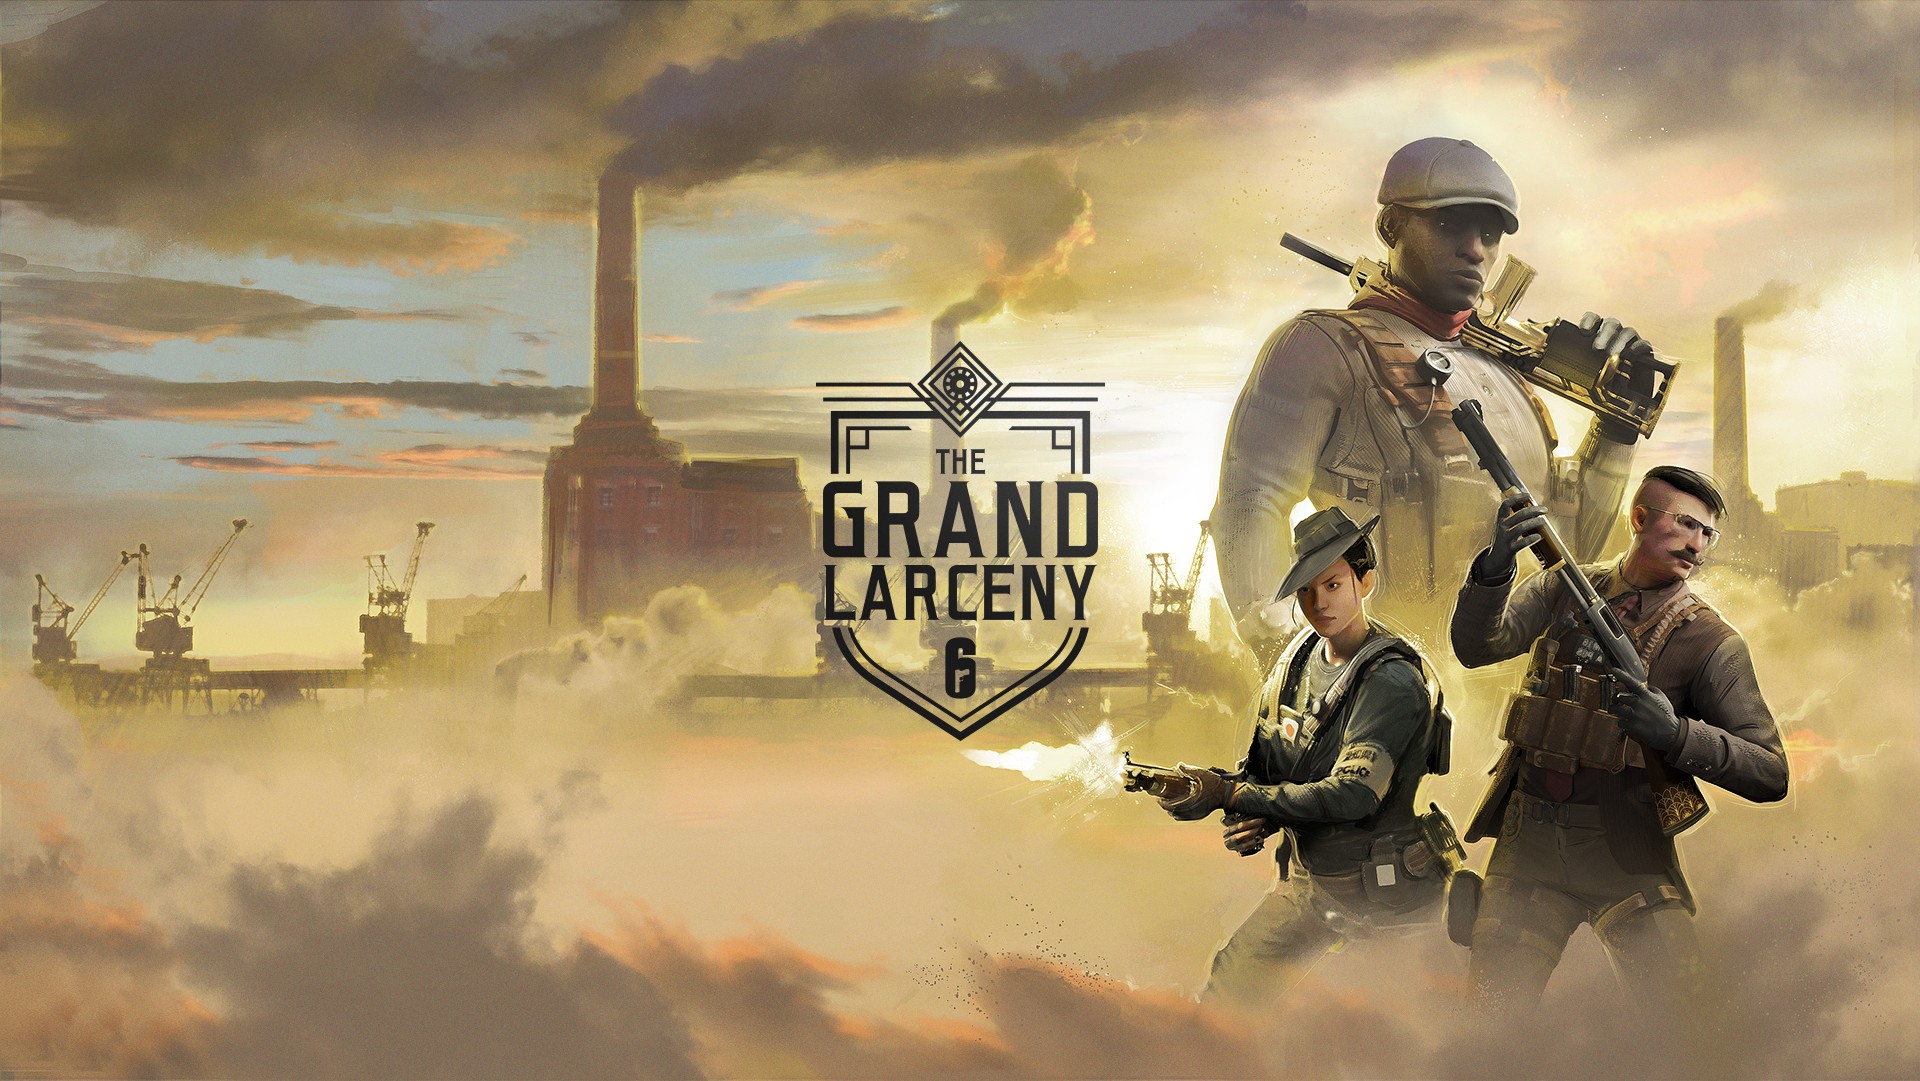 Video For Rainbow Six Siege Brings the ‘20s Roaring Back in The Grand Larceny Event